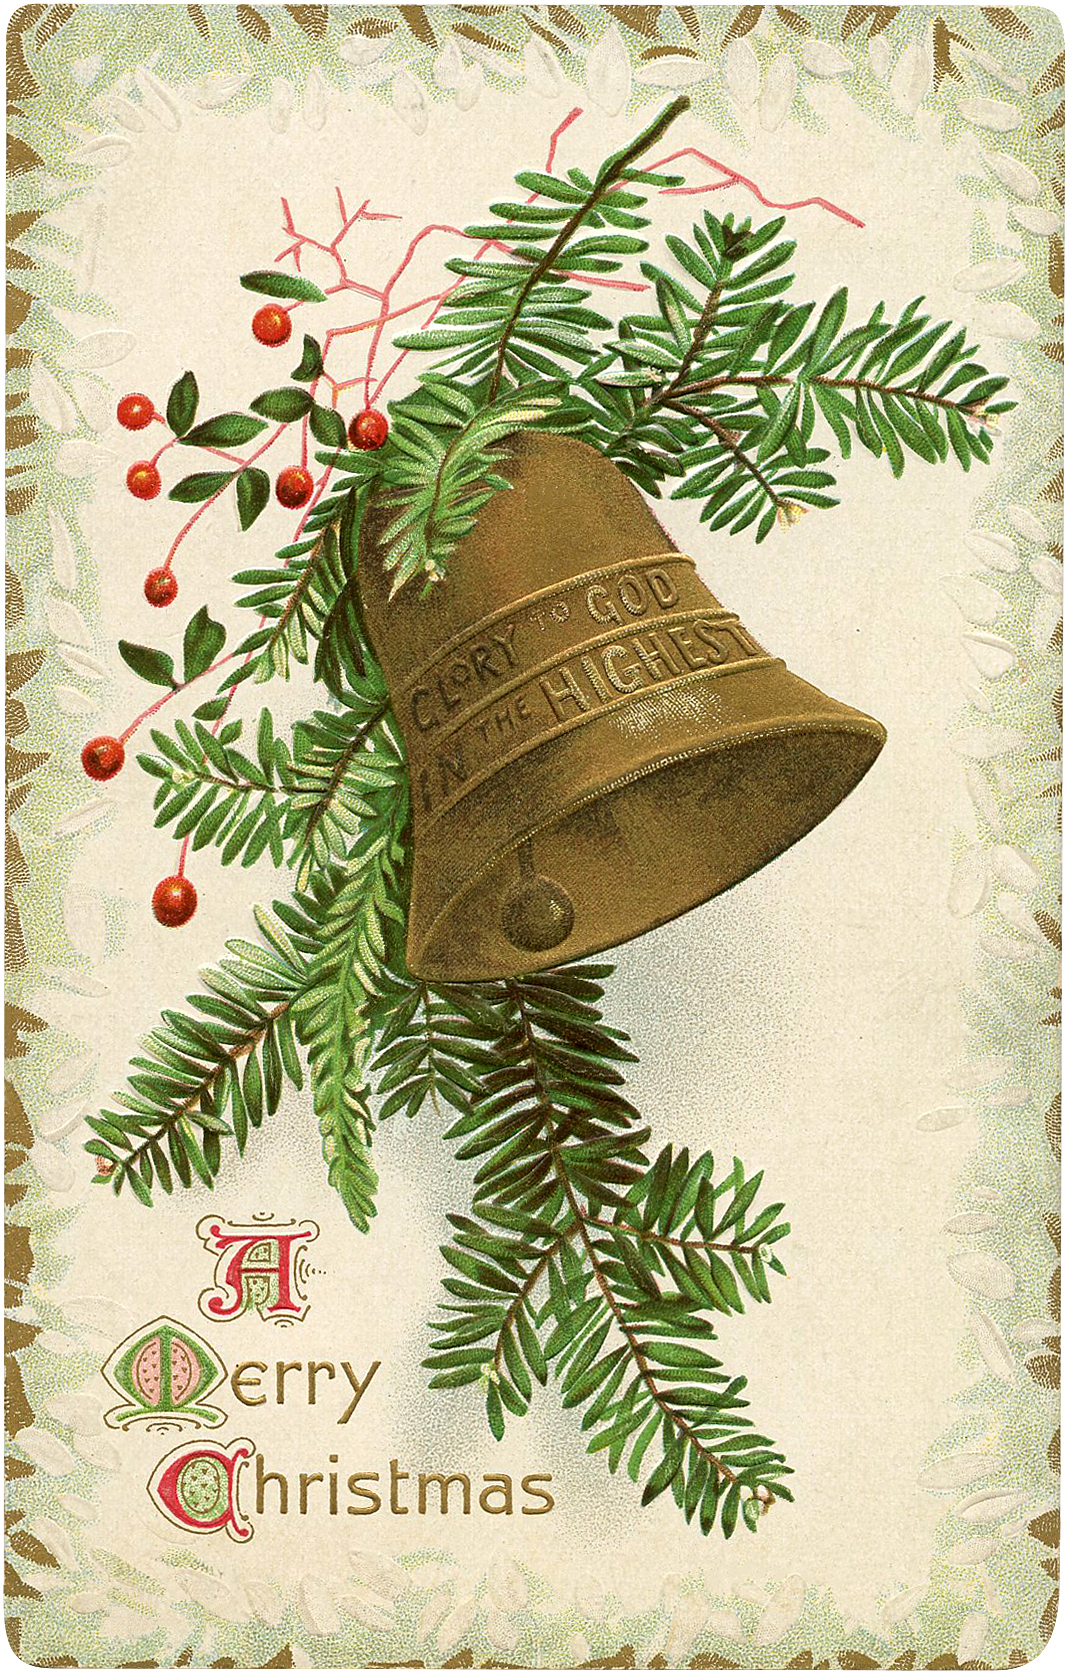 8 Merry Christmas Bell Images! - The Graphics Fairy